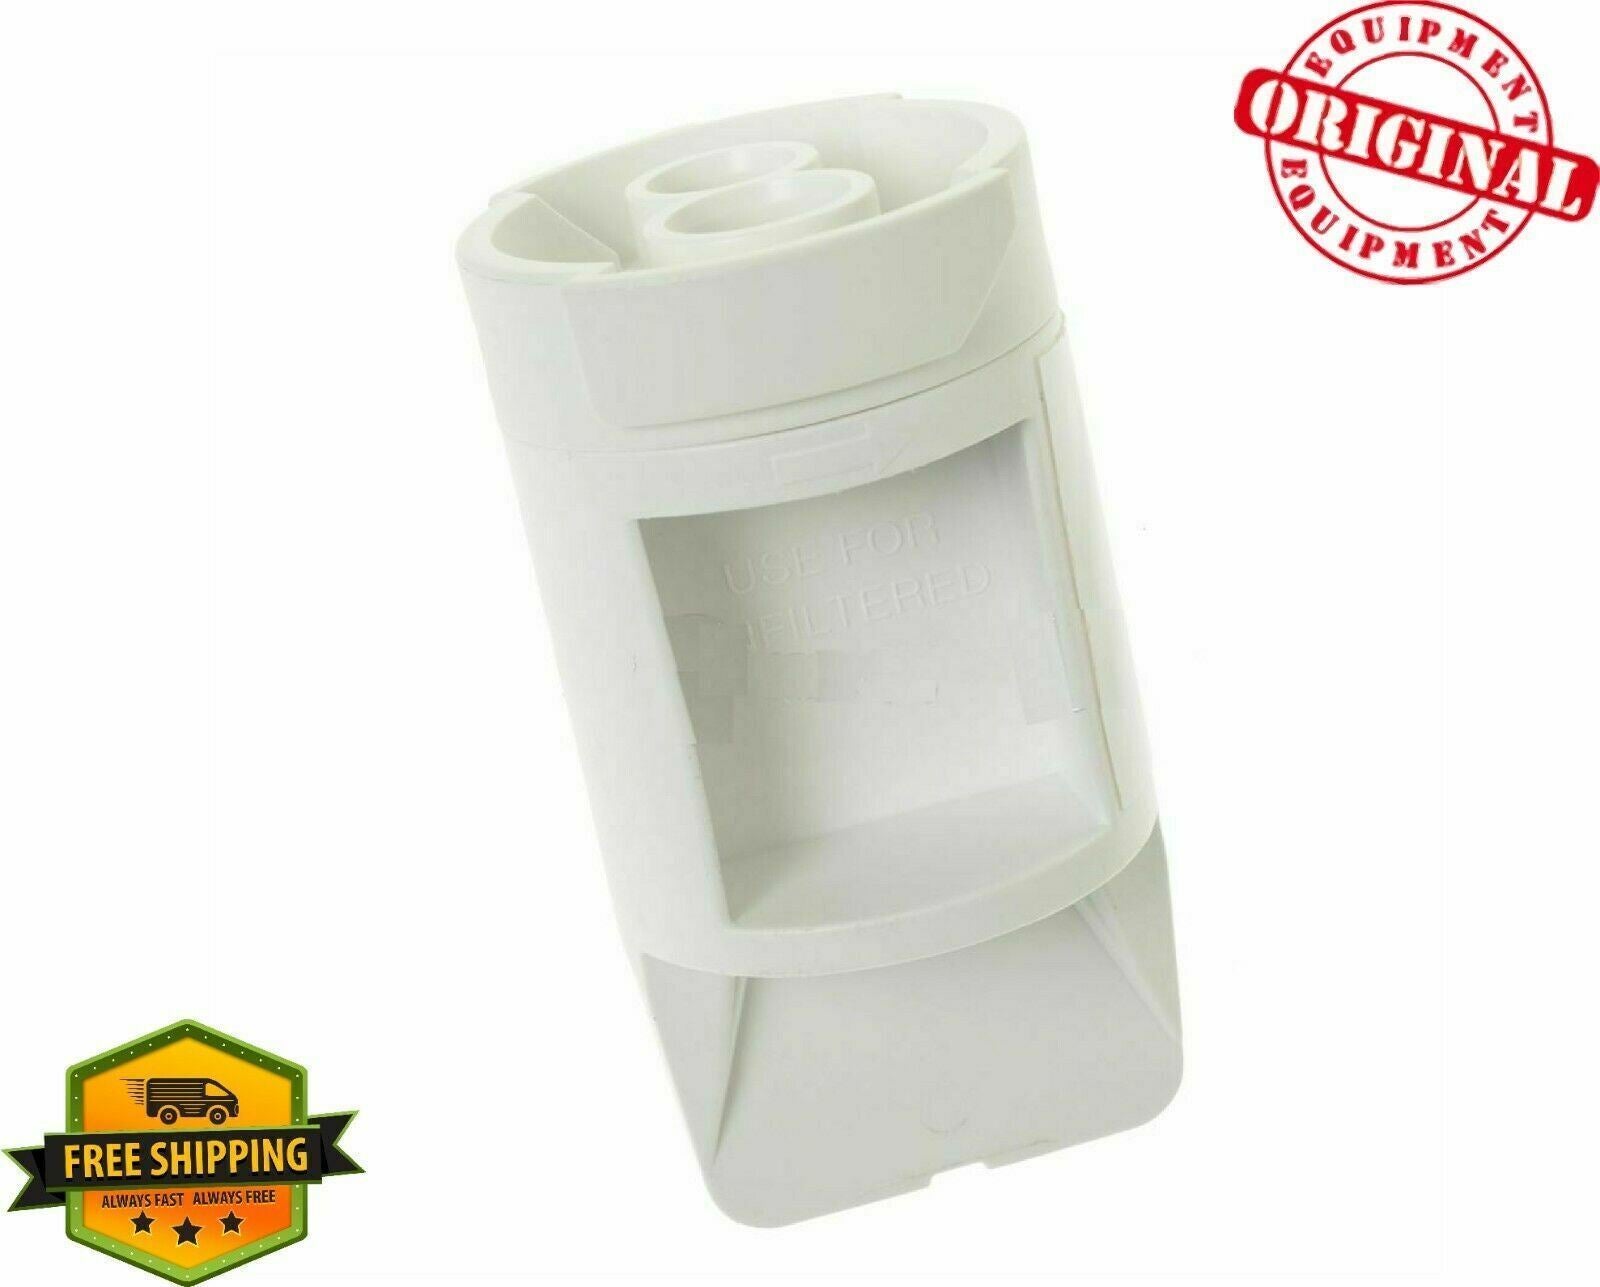 New Genuine OEM GE Refrigerator Water Filter Bypass Plug WR17X33825 / 17X33825